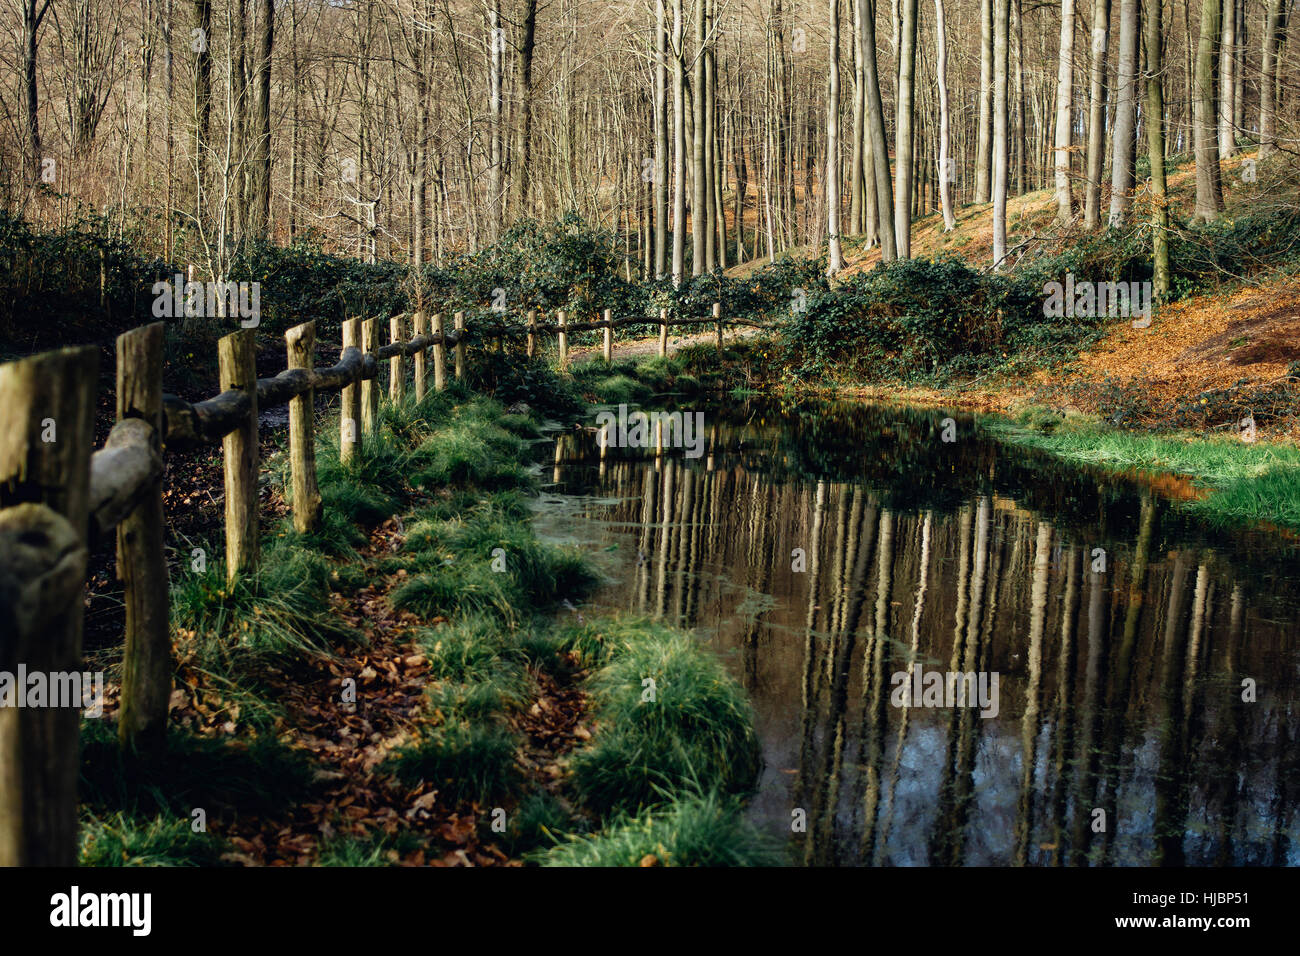 Forest swamp in the Muziekbos in Belgium during the winter with bare trees and a fence next to te water. Stock Photo